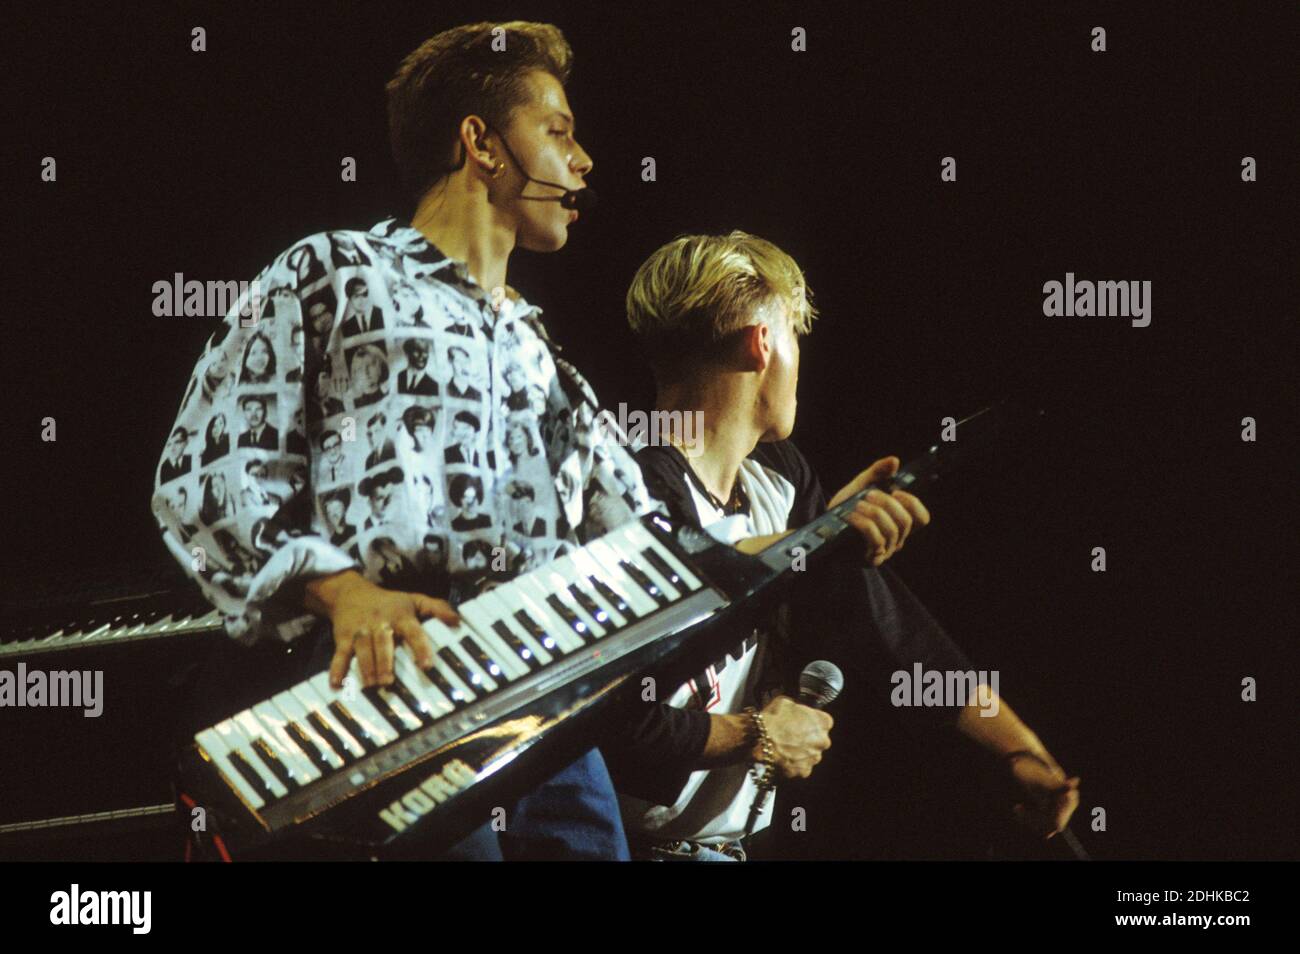 Michael Szumowski and David Dixon from Indecent Obsession live at the London Arena. London, April 23, 1990 | usage worldwide Stock Photo